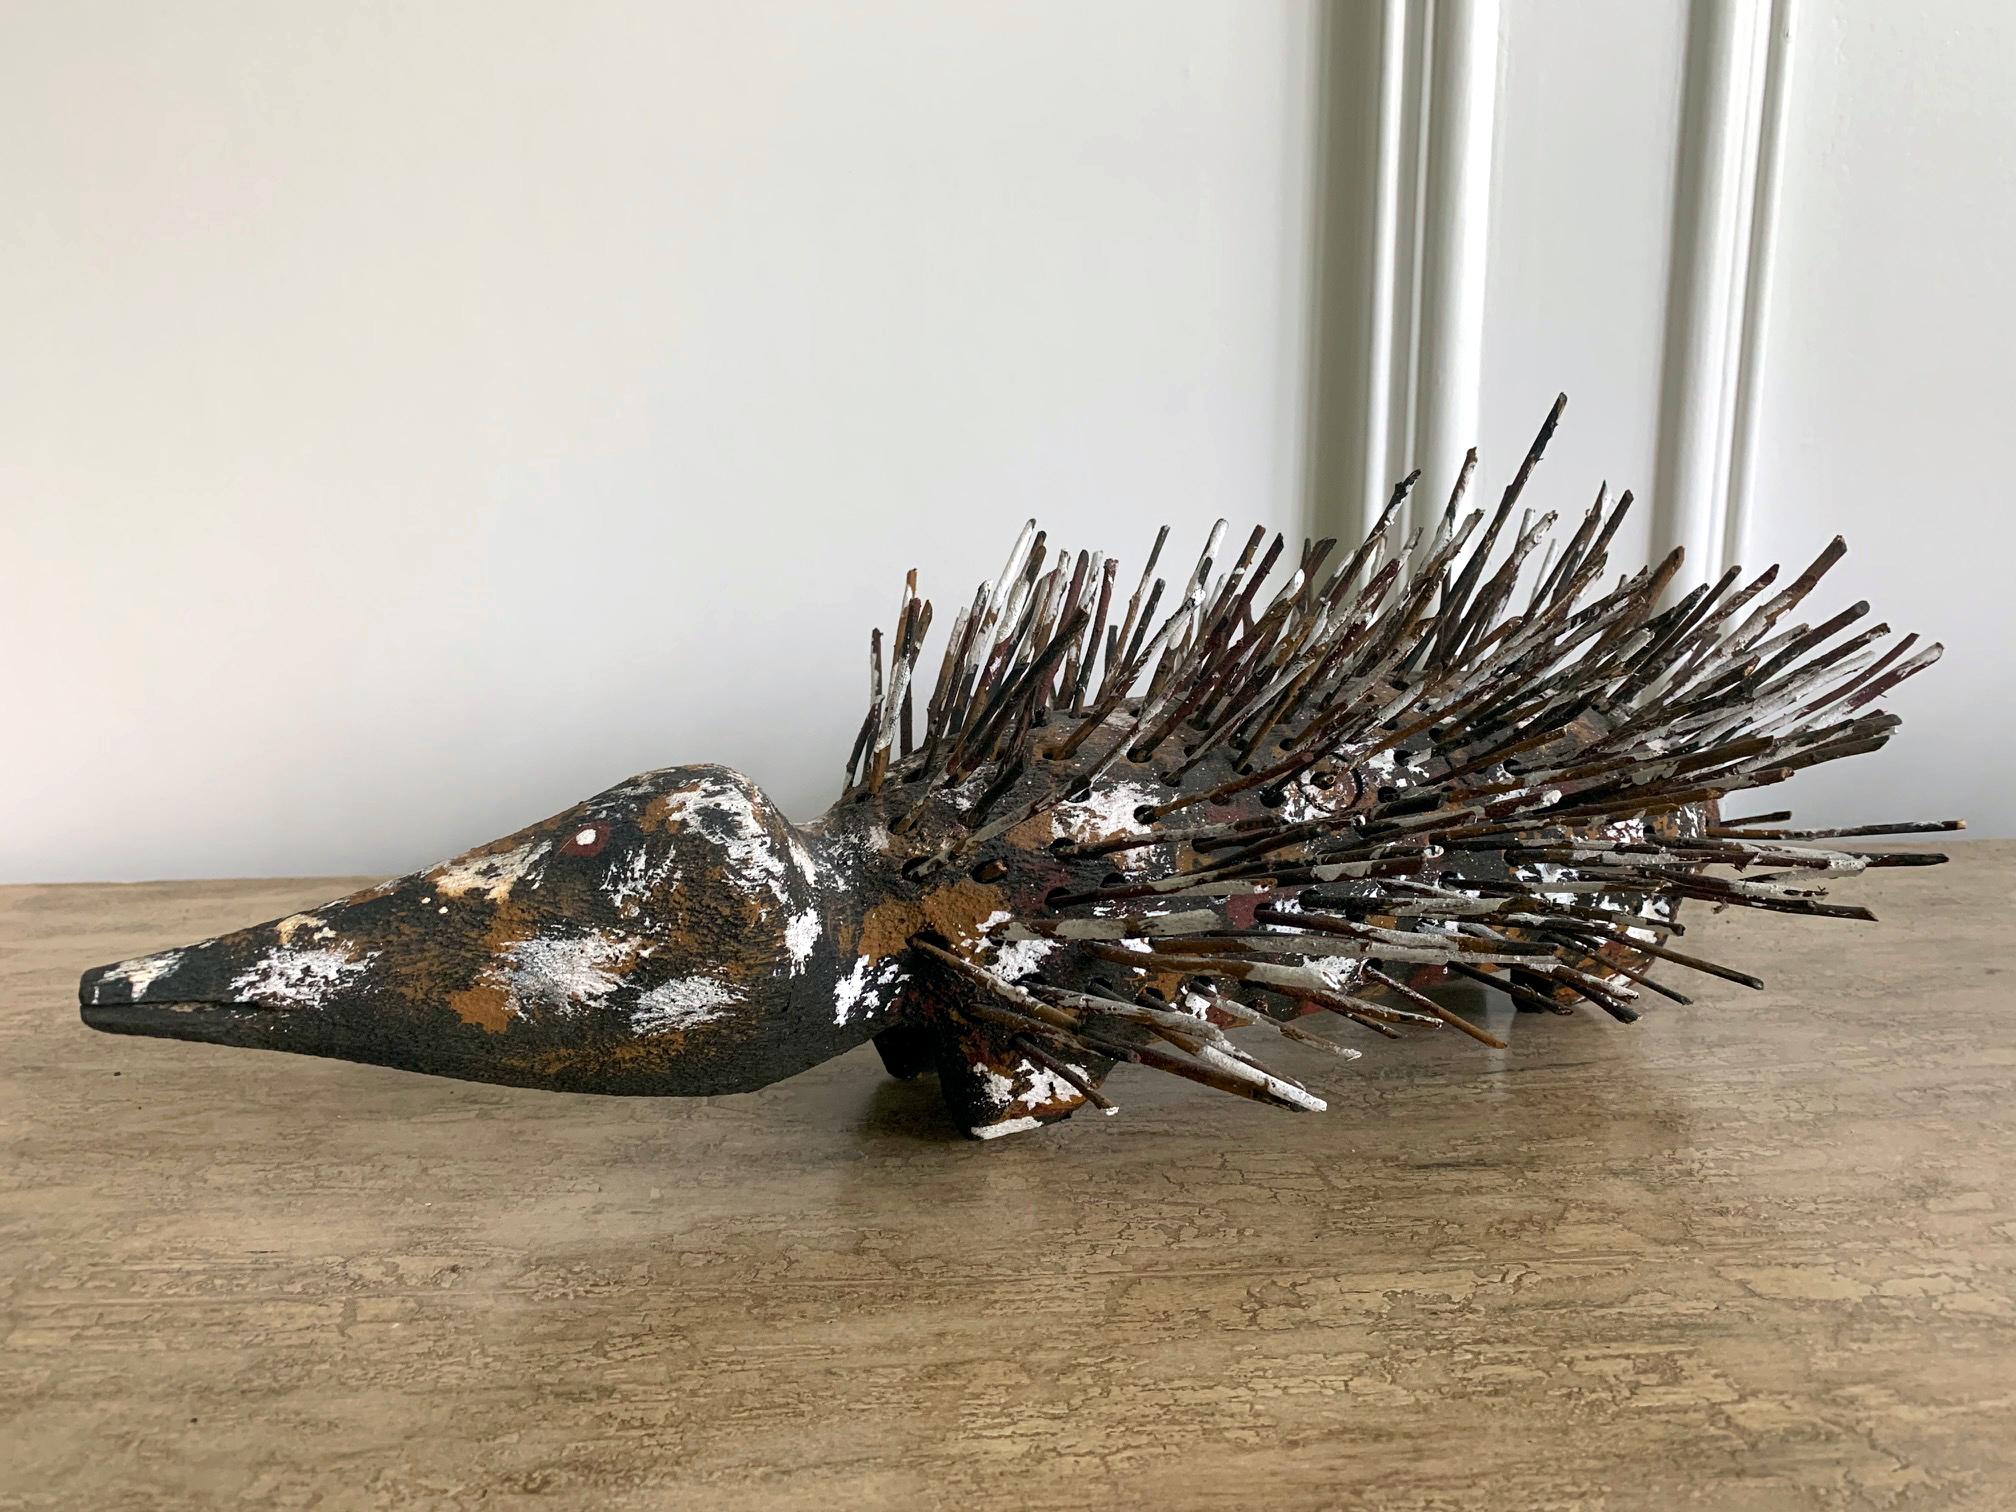 A pair of echidna sculpture carved from wood with found branches made by Australian Aboriginal artist Bob Burruwal (Born 1952-). Bob Burruwal is a celebrated Rembarrnga artist, who lives and works at Ankabarrbirri, an outstation, close to